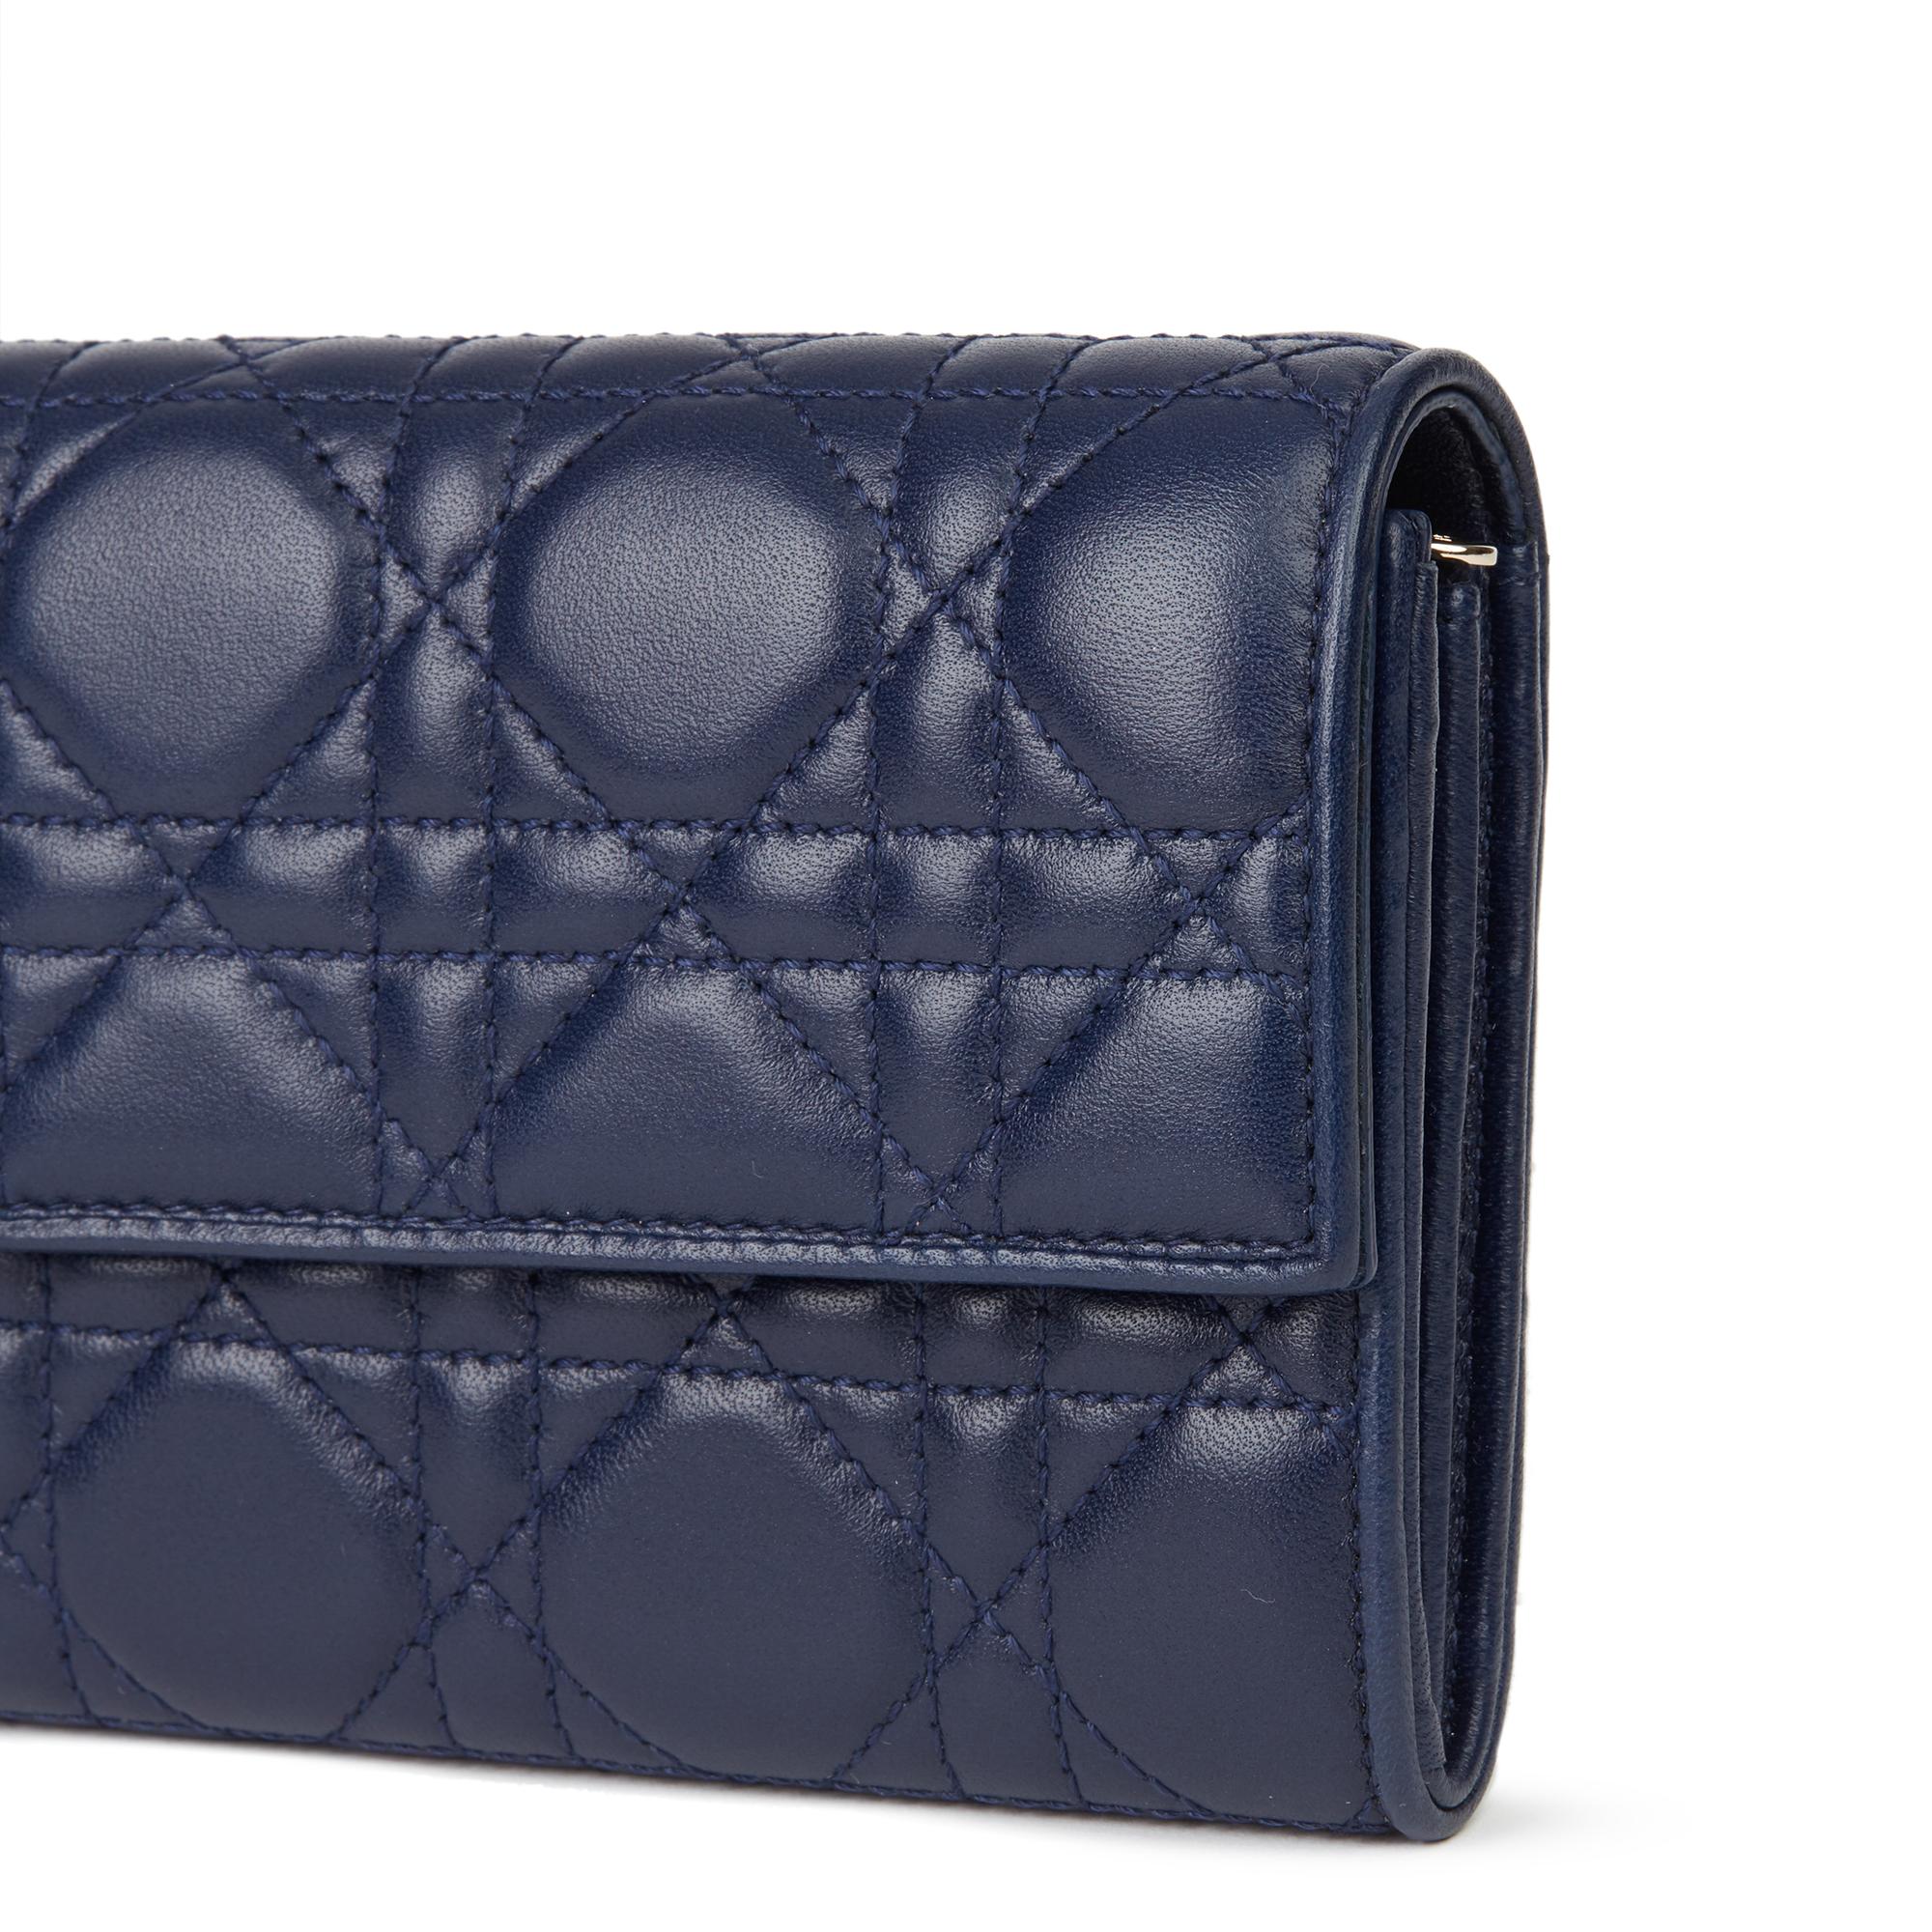 2017 Christian Dior Navy Quilted Lambskin Lady Dior Wallet  2